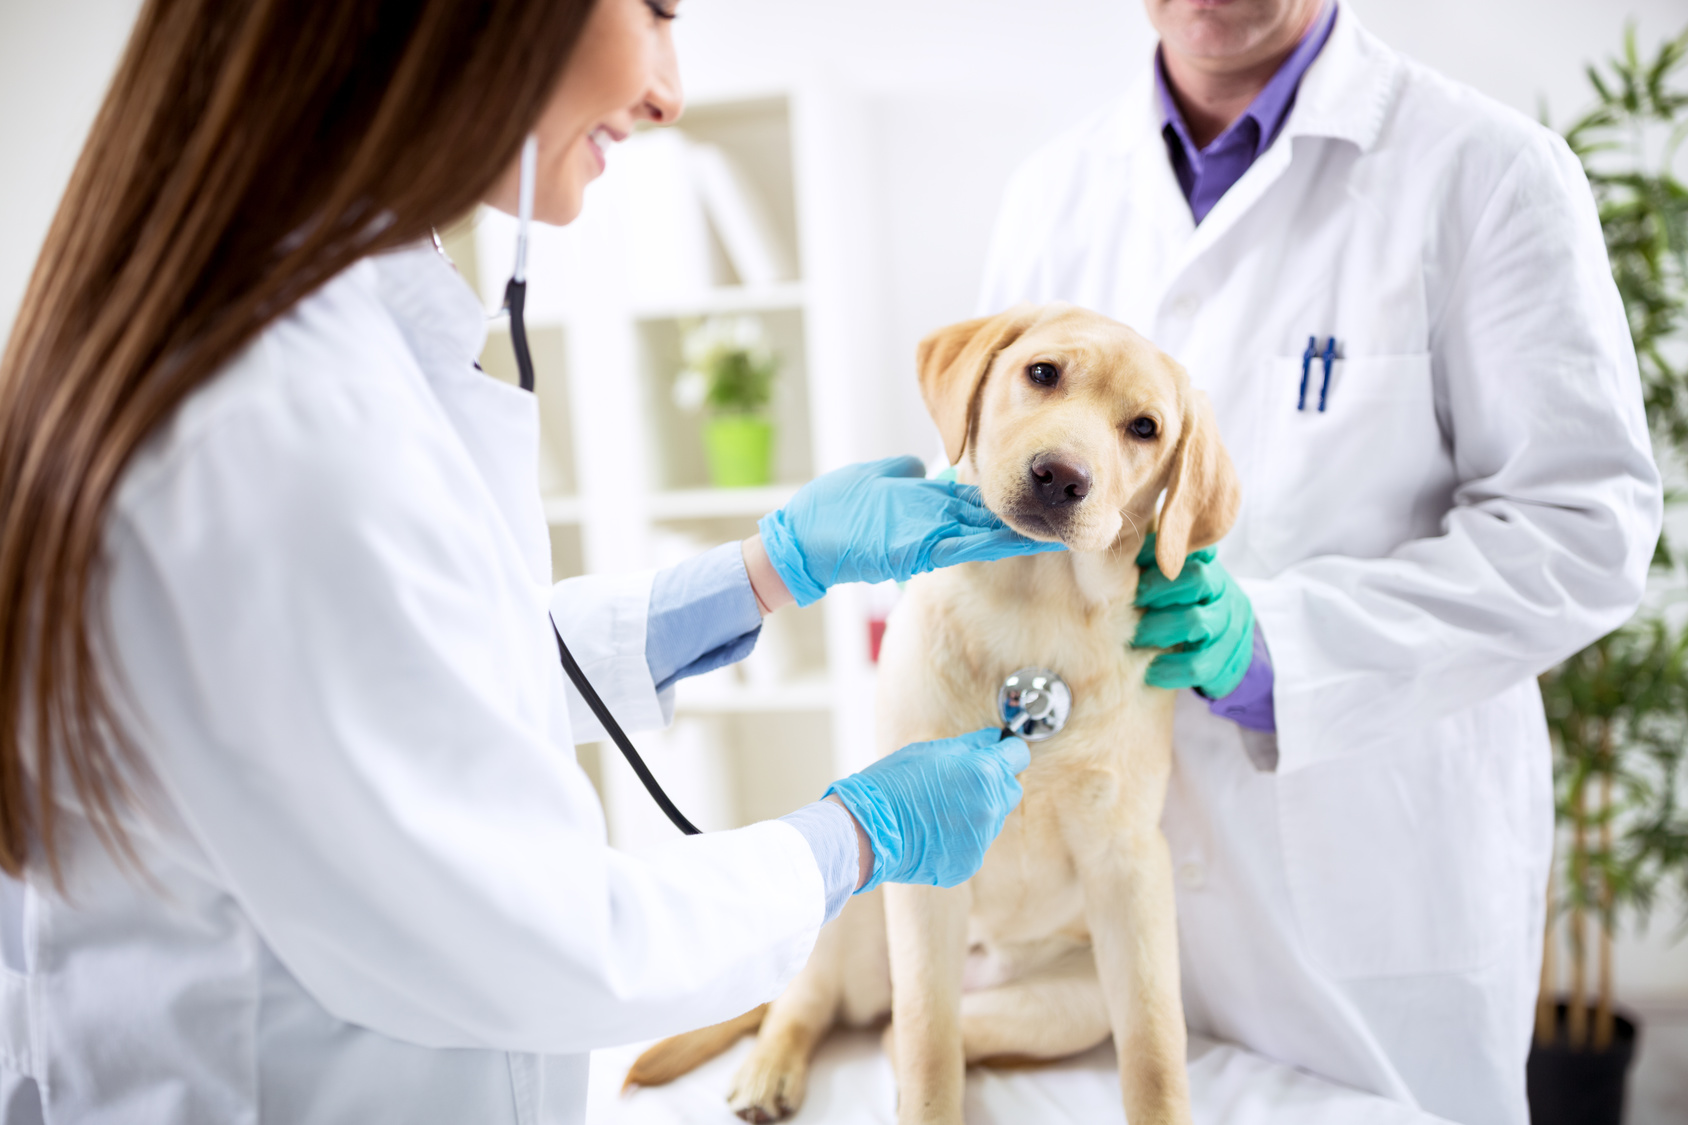 How to Find Low Cost Vet Care in Your Area - FindABusinessThat.com